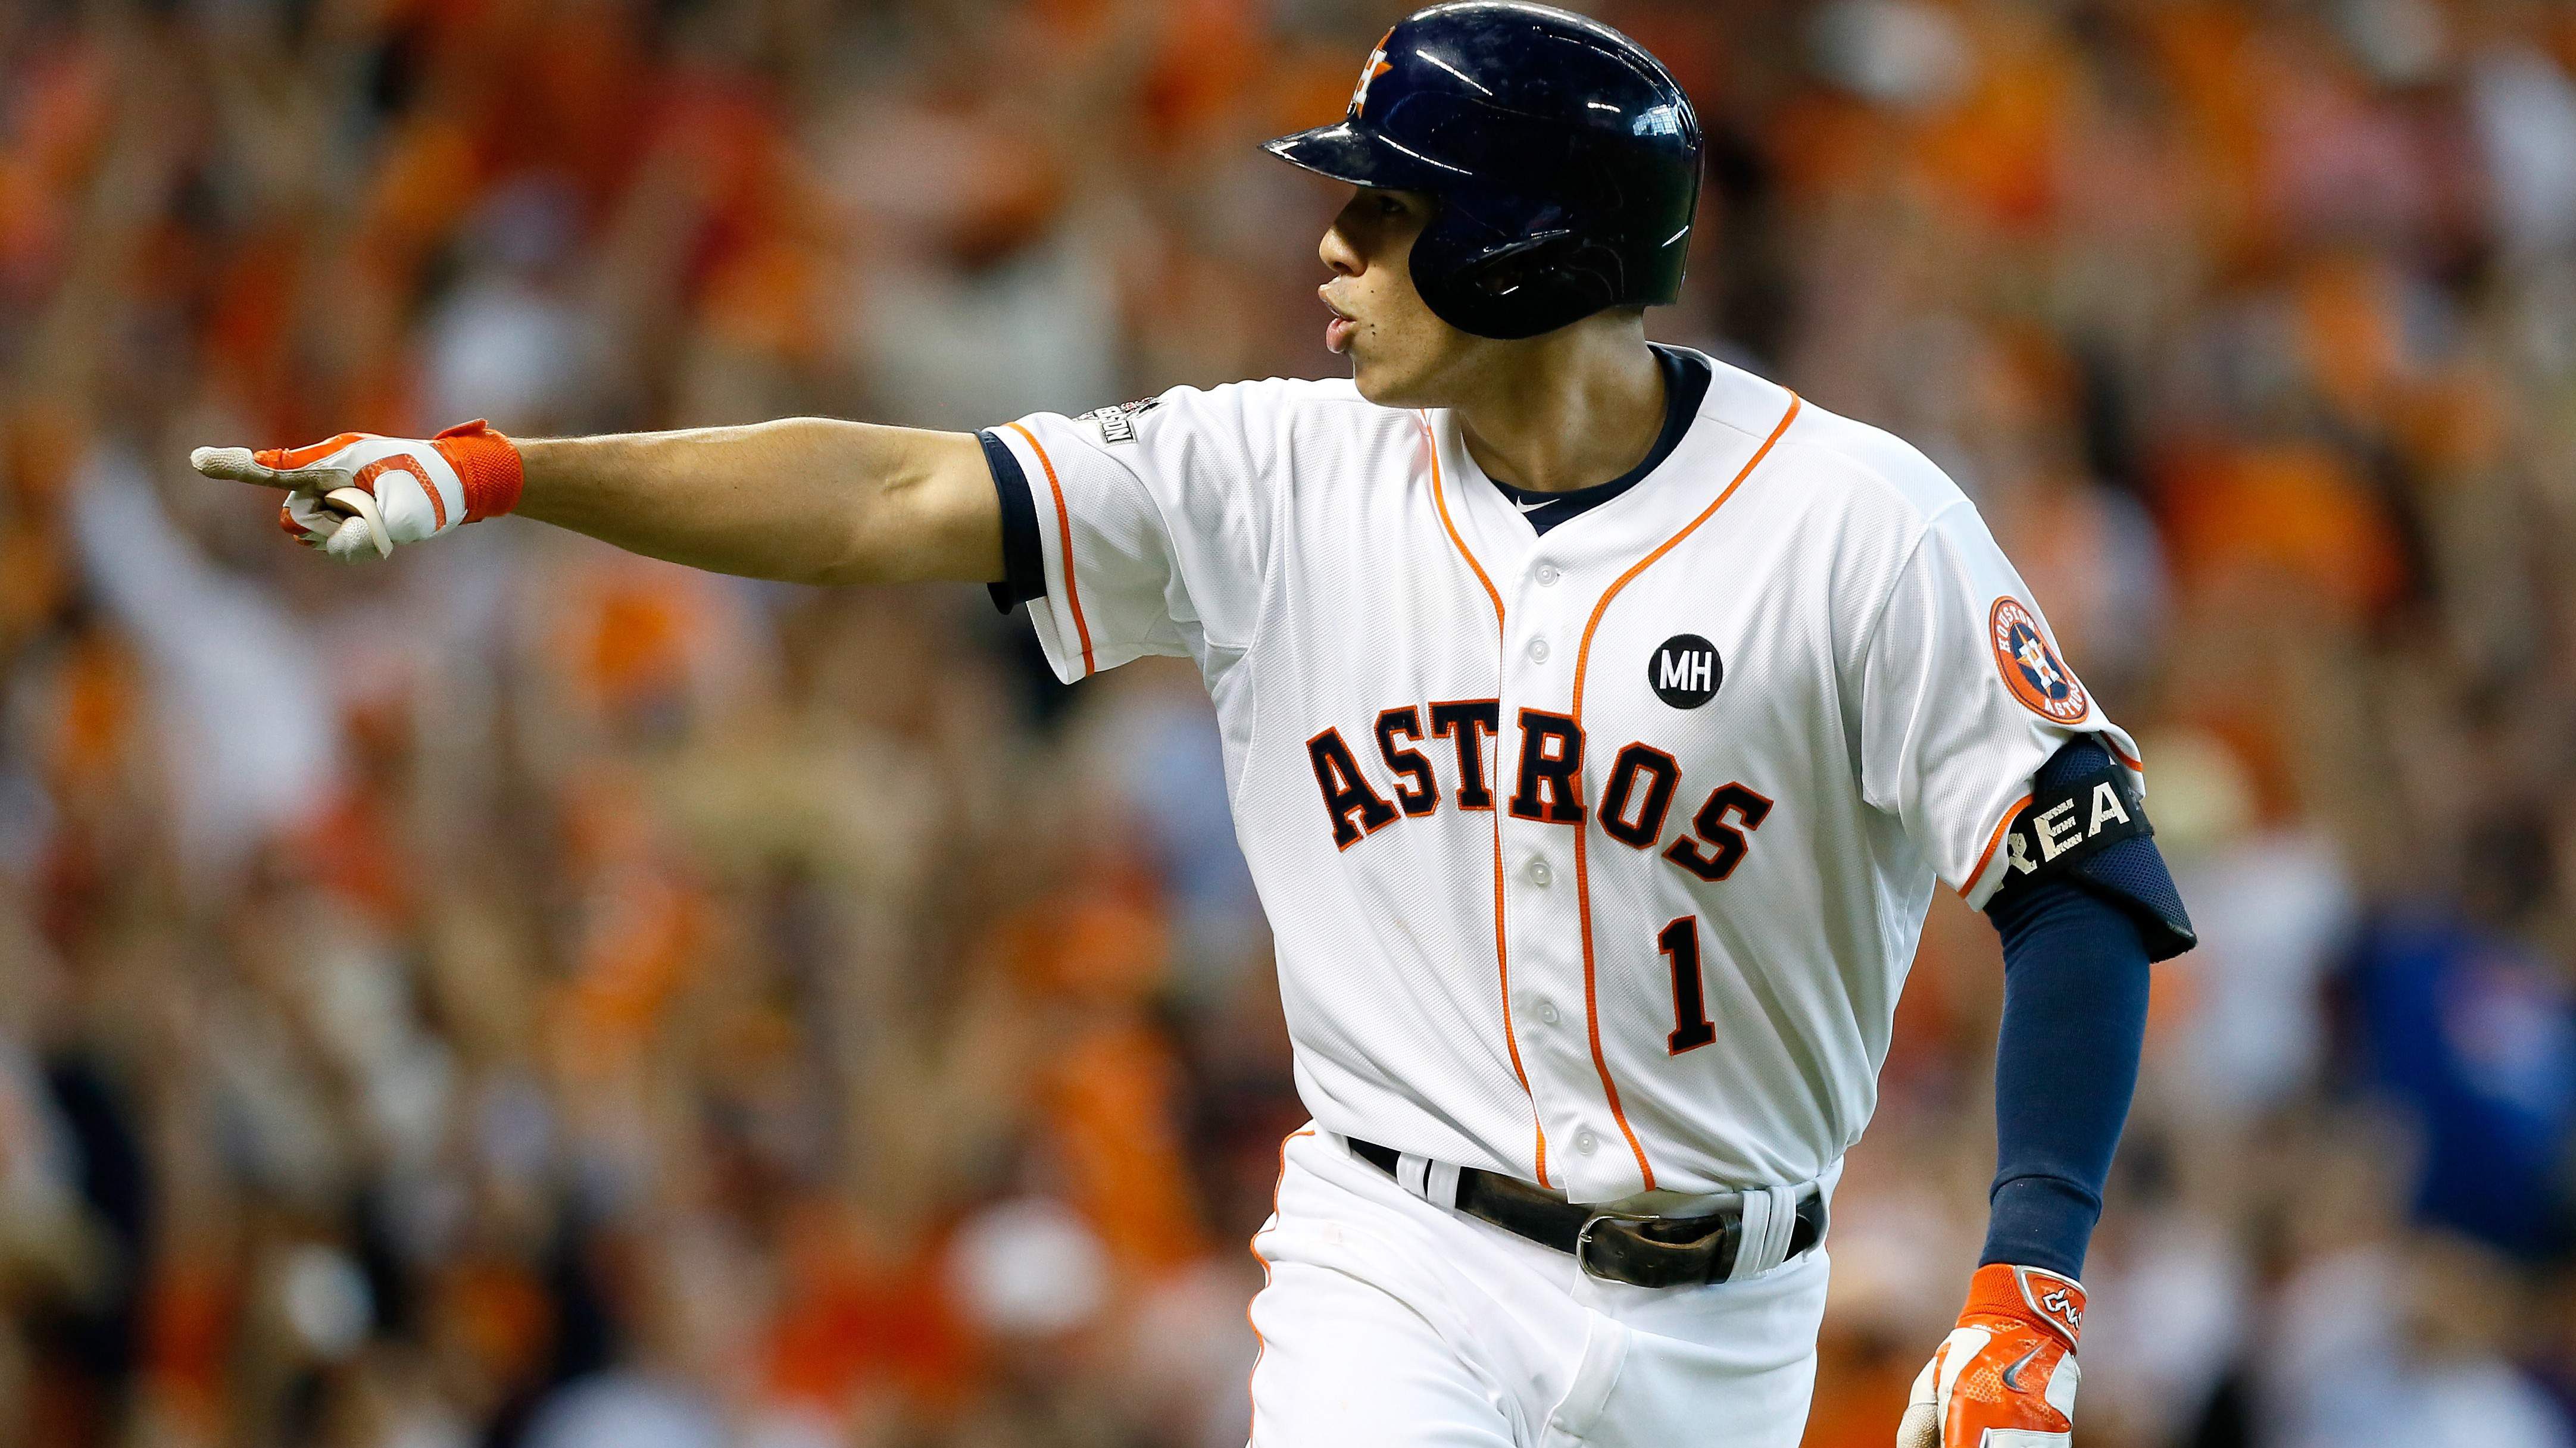 How to Watch ALDS Game 5 Astros vs. Royals Live Stream Online